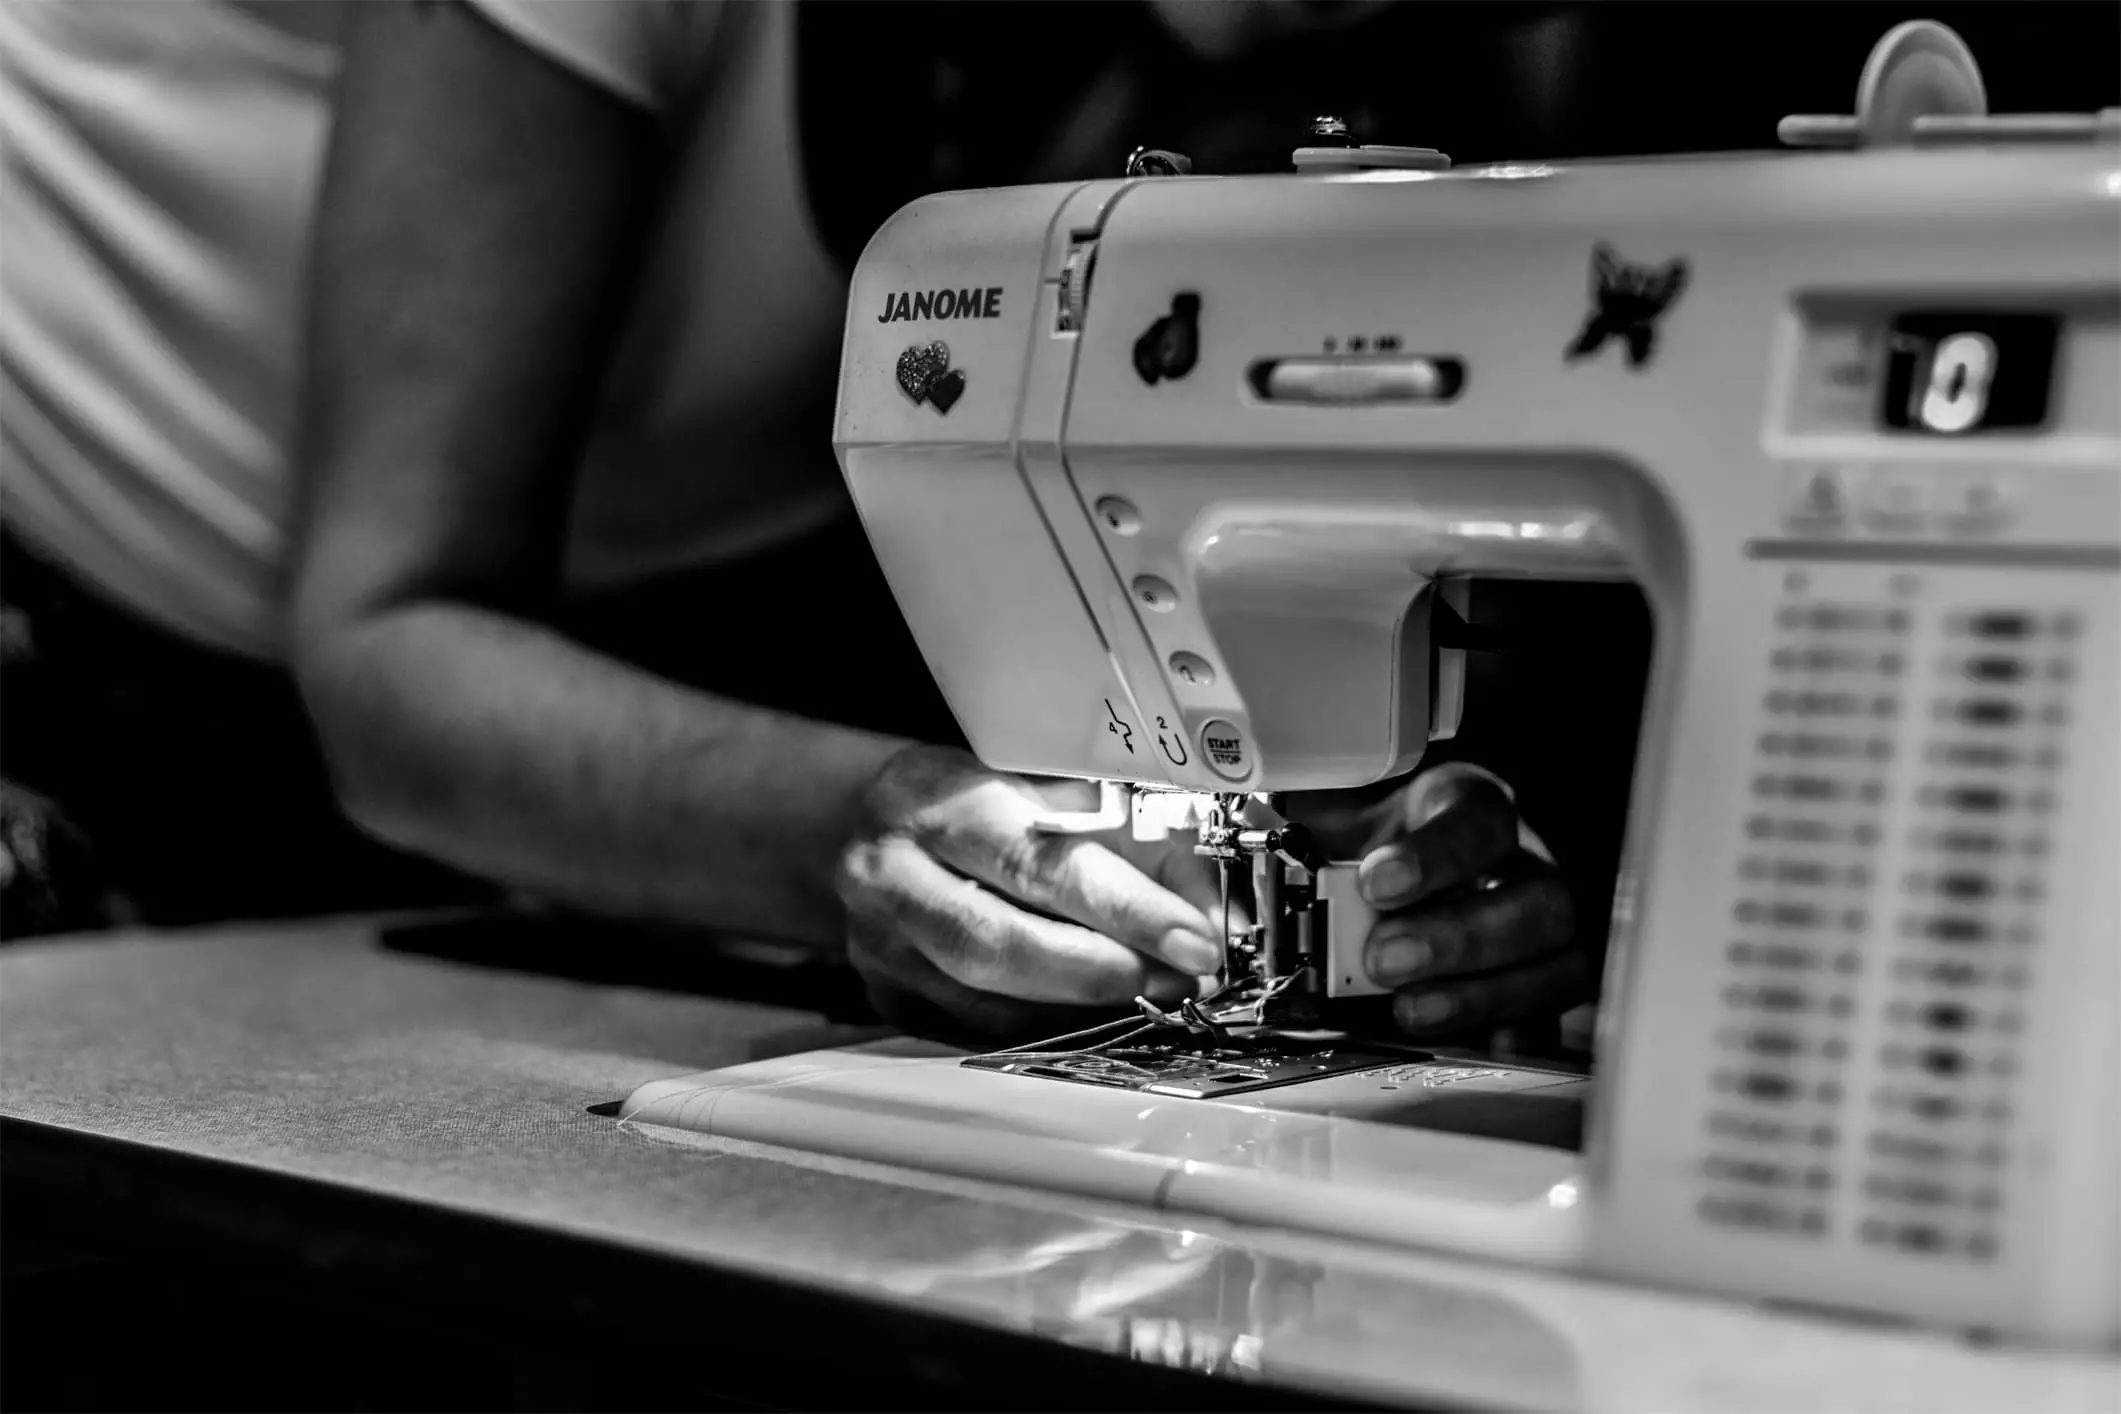 Why Is The Sewing Machine Often Oiled?